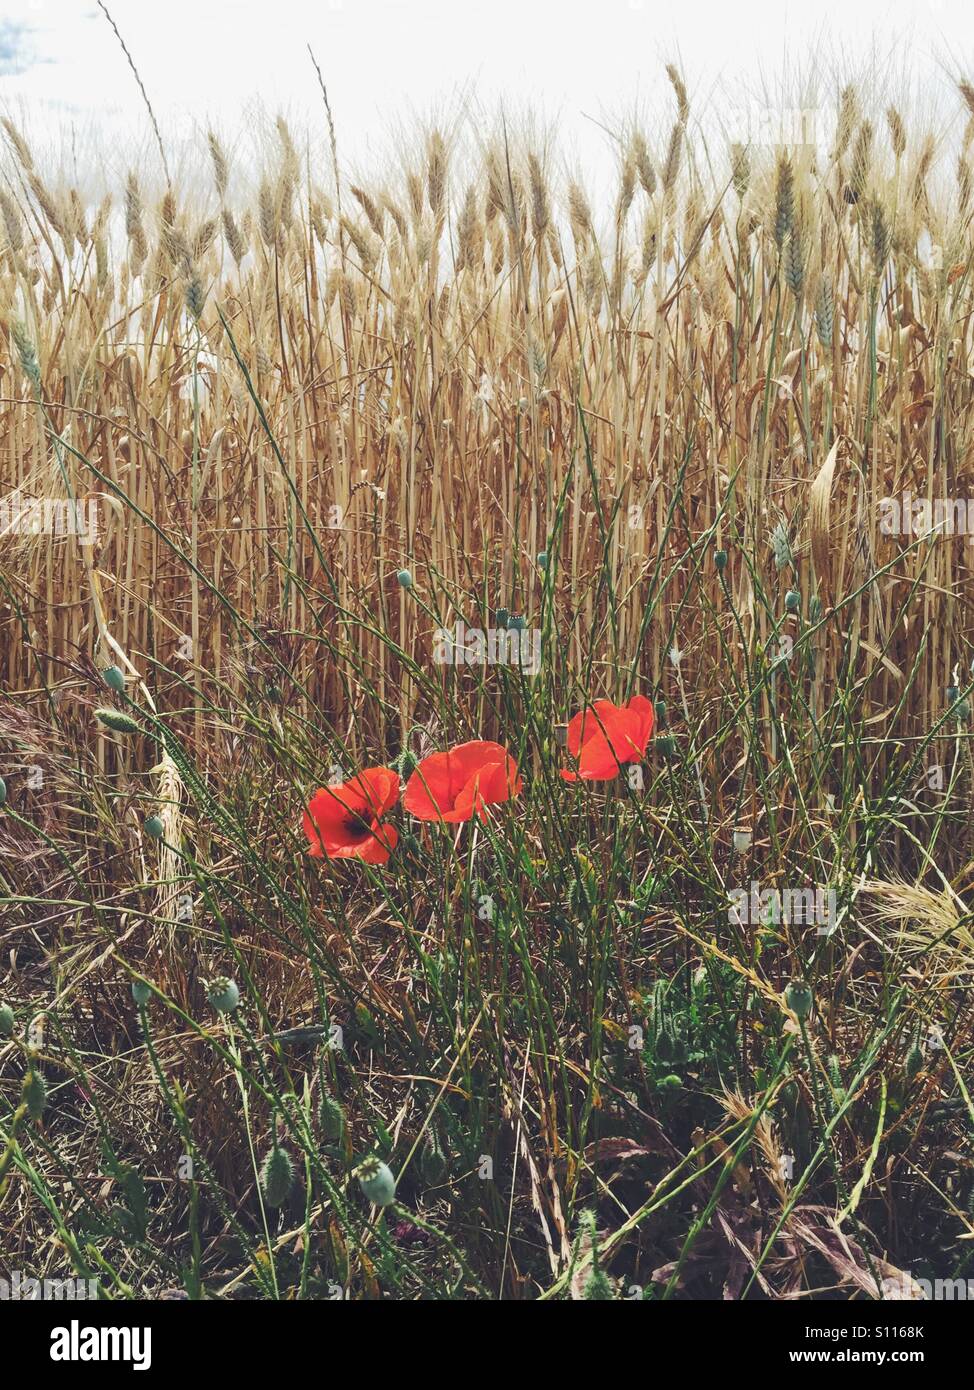 Wild Poppies in a wheat field, near Uzes, in the Gard region of Languedoc Roussillon, France Stock Photo